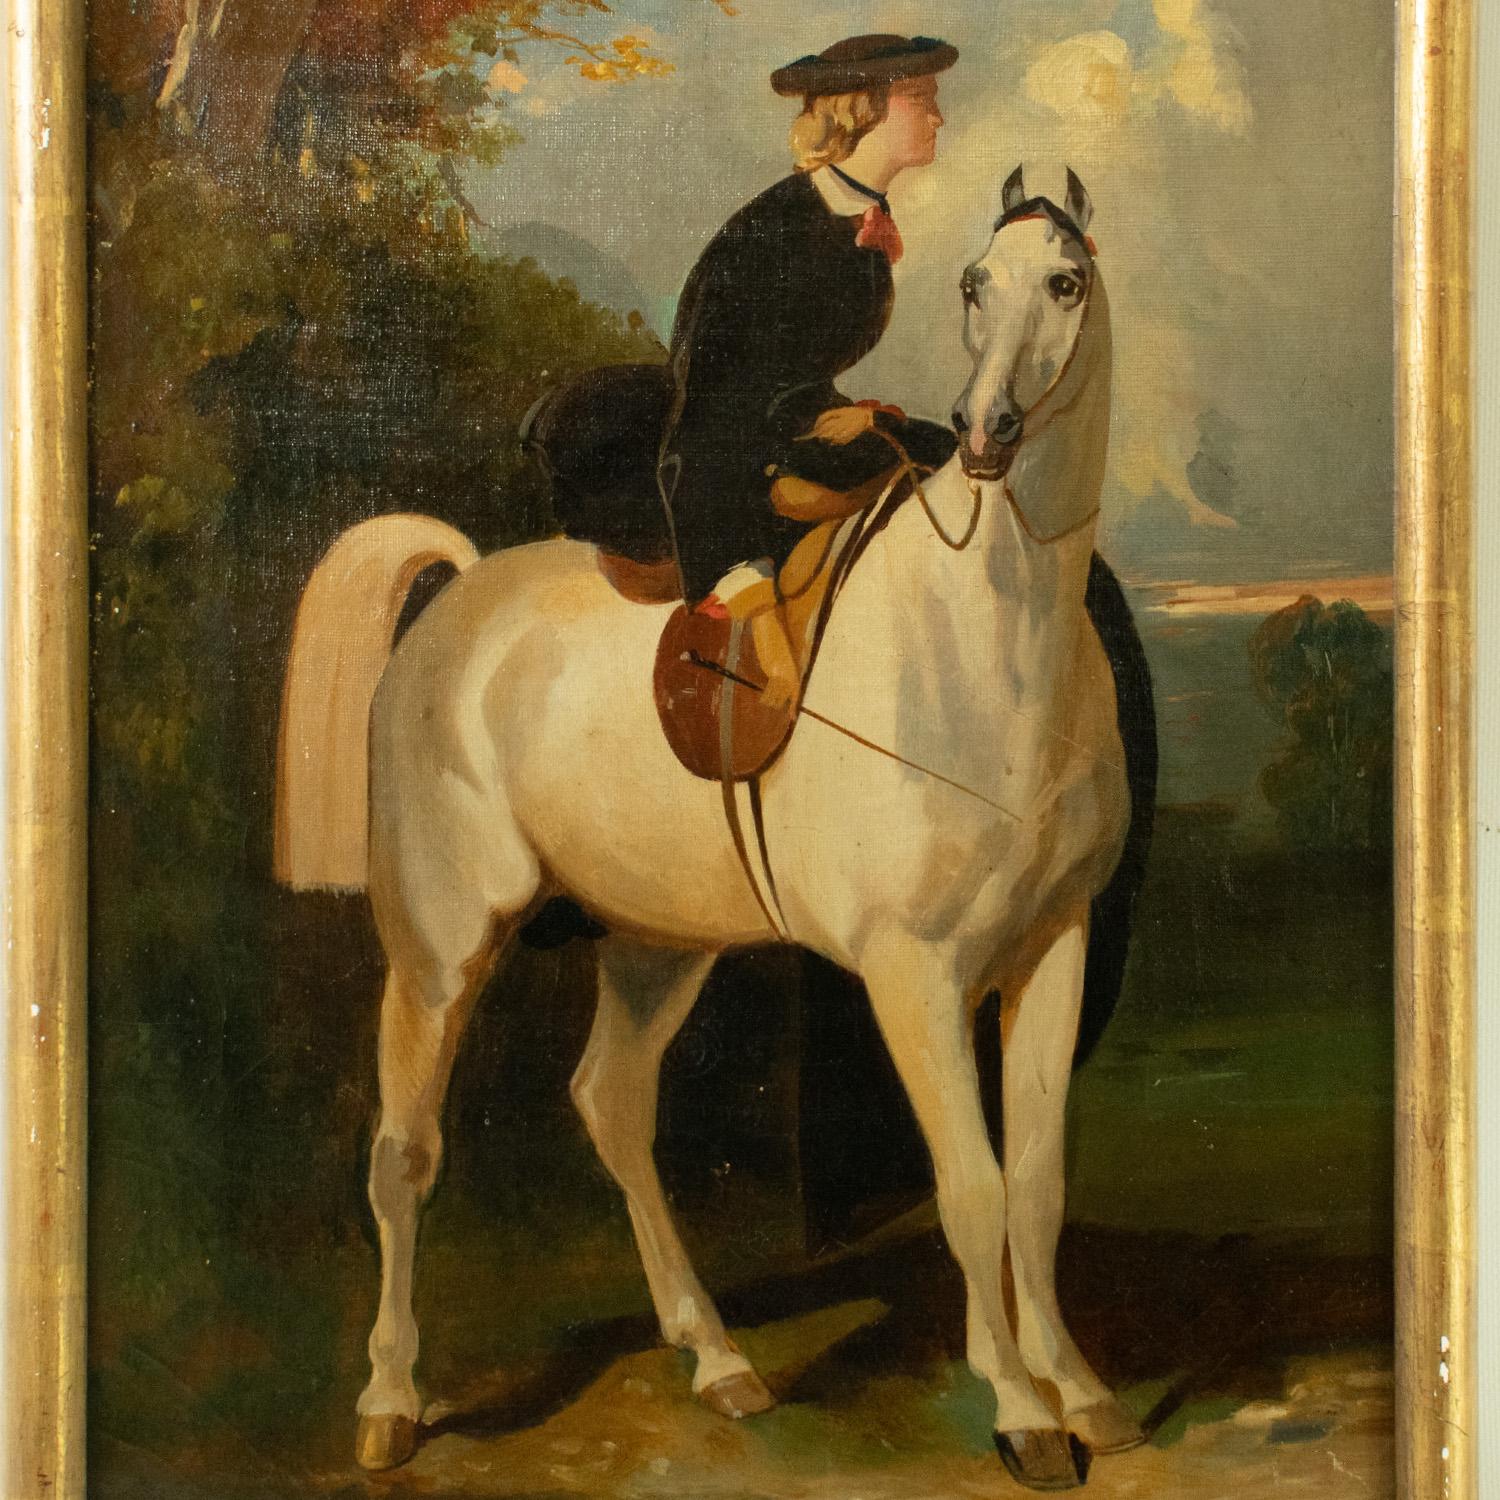 After Alfred de DREUX Amazone wearing a beret on her grey horse - 19th Century

Provenance: This striking painting appears in the Catalogue raisonne curated by Marie-Christine RENAULD for Alfred de DREUX - Inventory MCR 43 and is mentioned in the